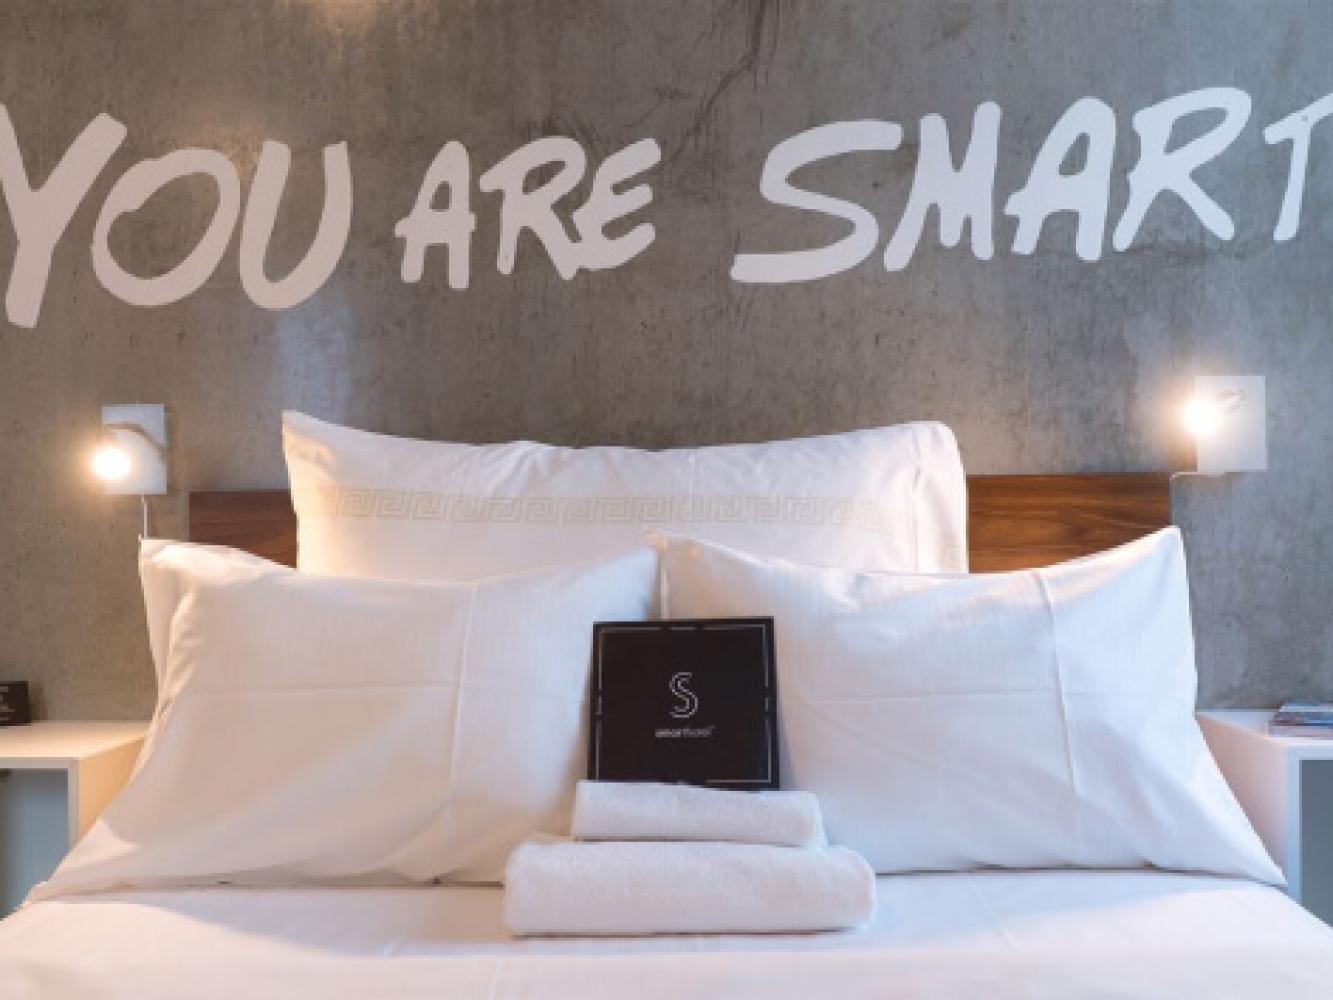 Bed in hotel room at Smarthotel. "Your are smart" are written on the wall.